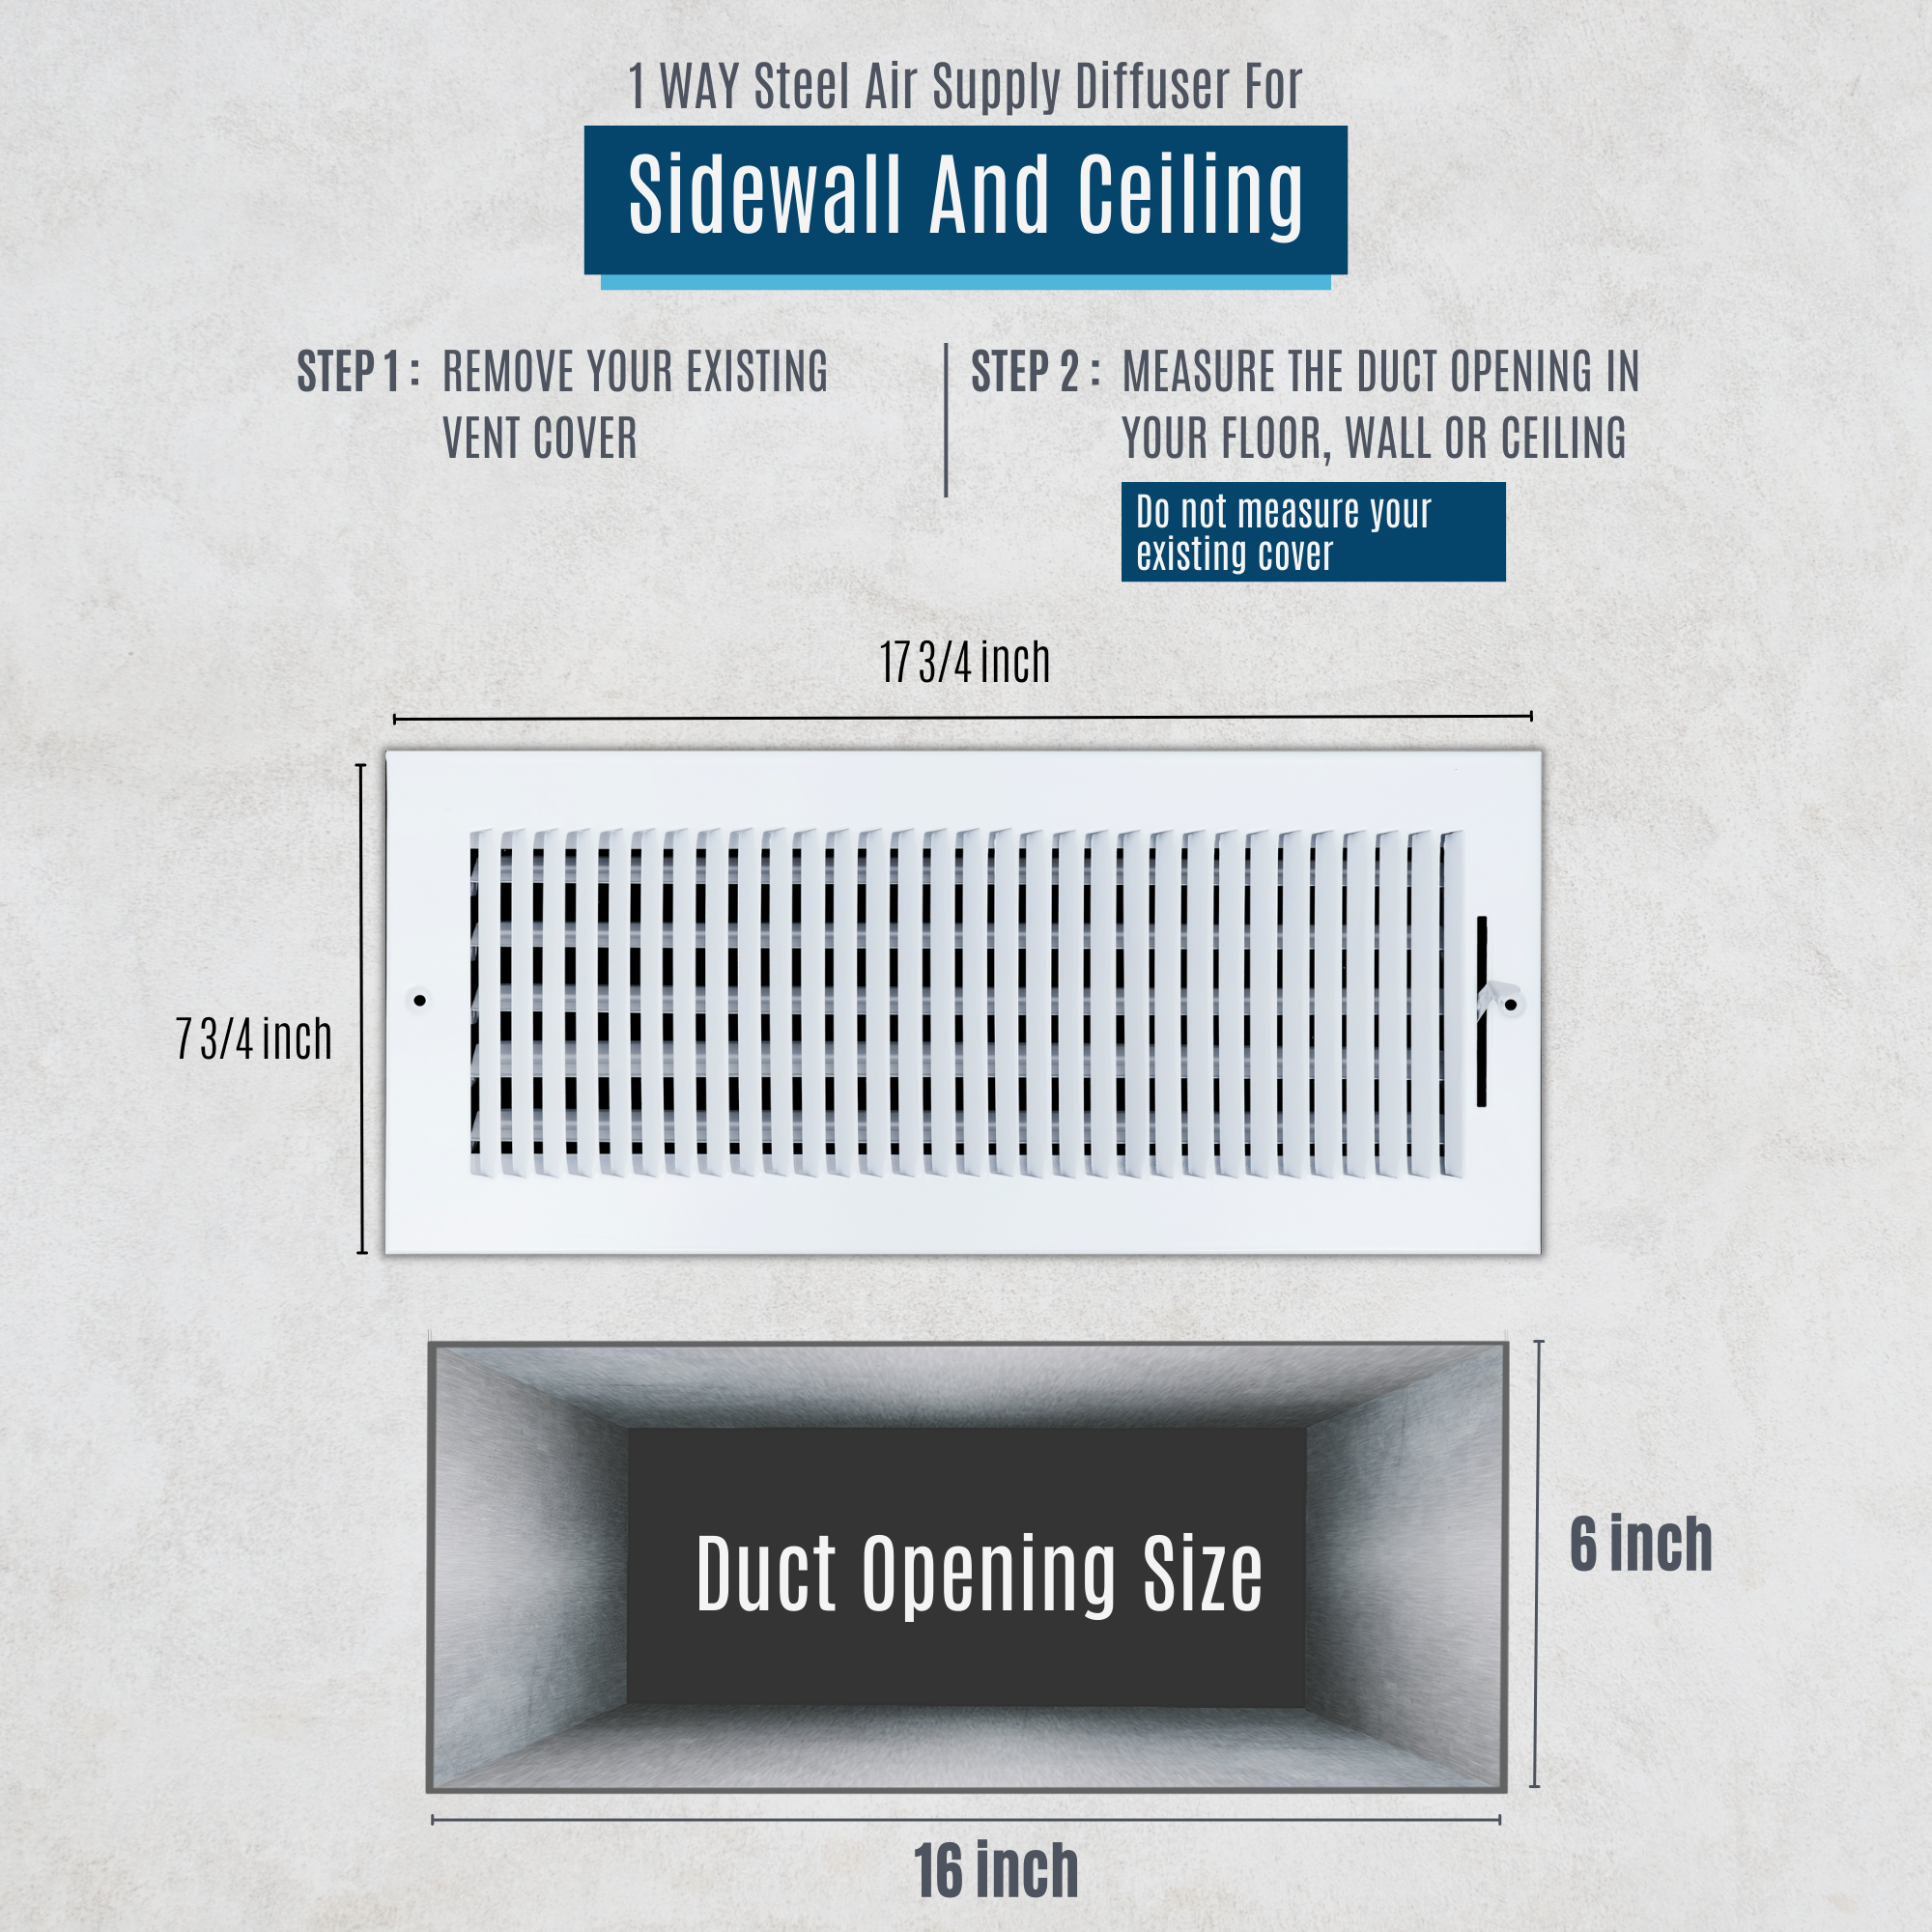 16 X 6 Duct Opening | 1 WAY Steel Air Supply Diffuser for Sidewall and Ceiling